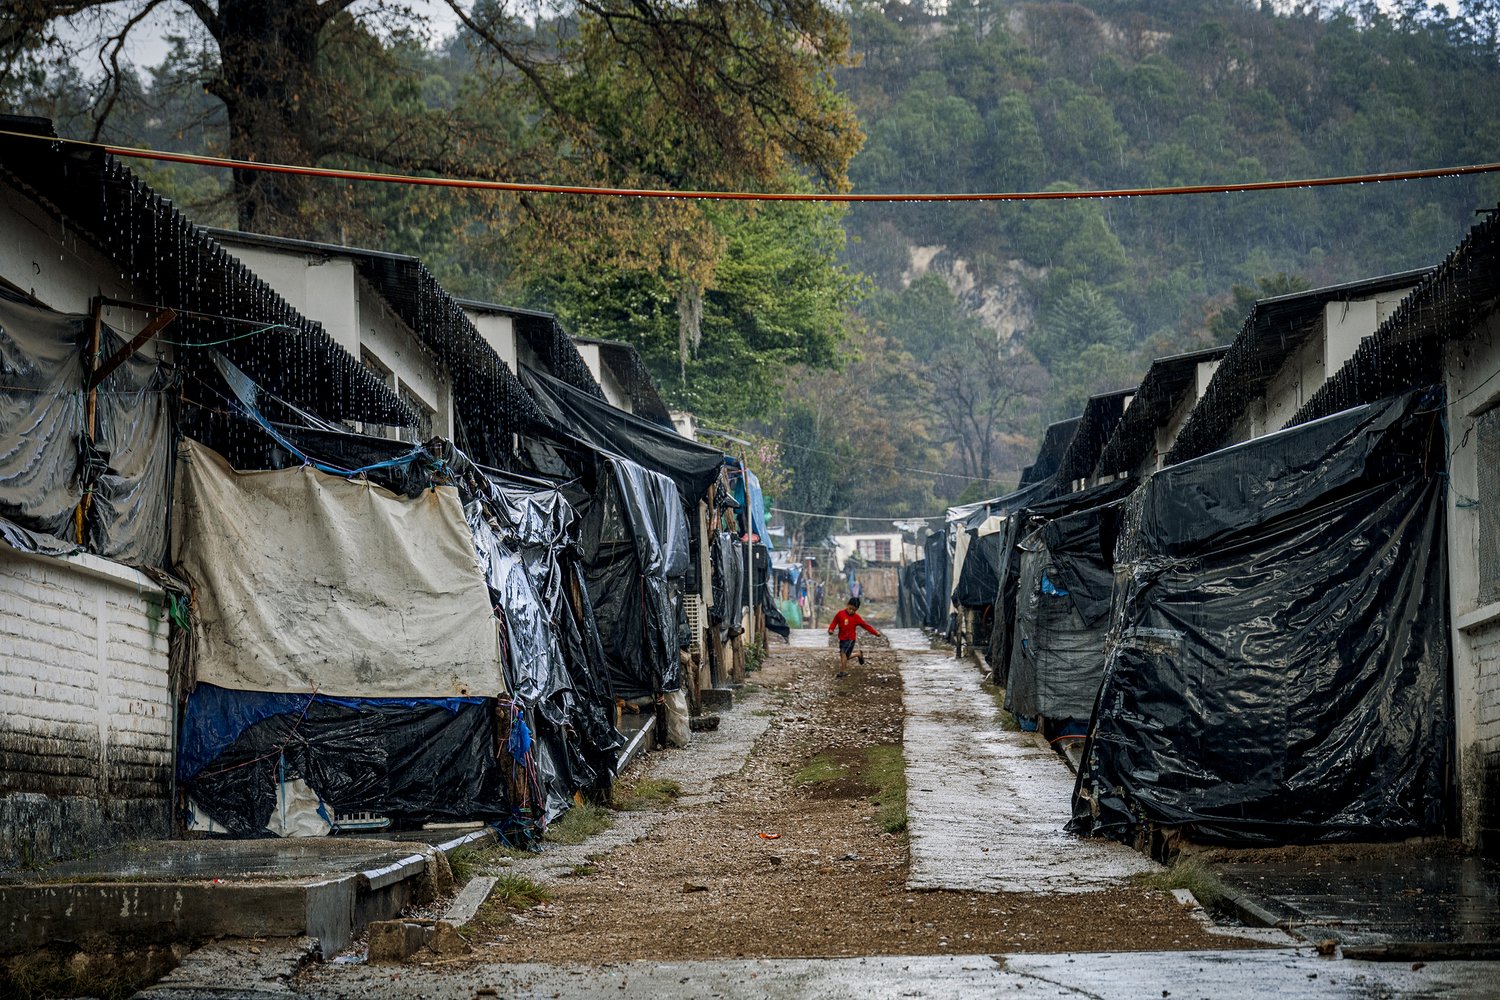 Tents that house displaced families in the municipality of Chenalhó, Chiapas. © Andrea Godínez